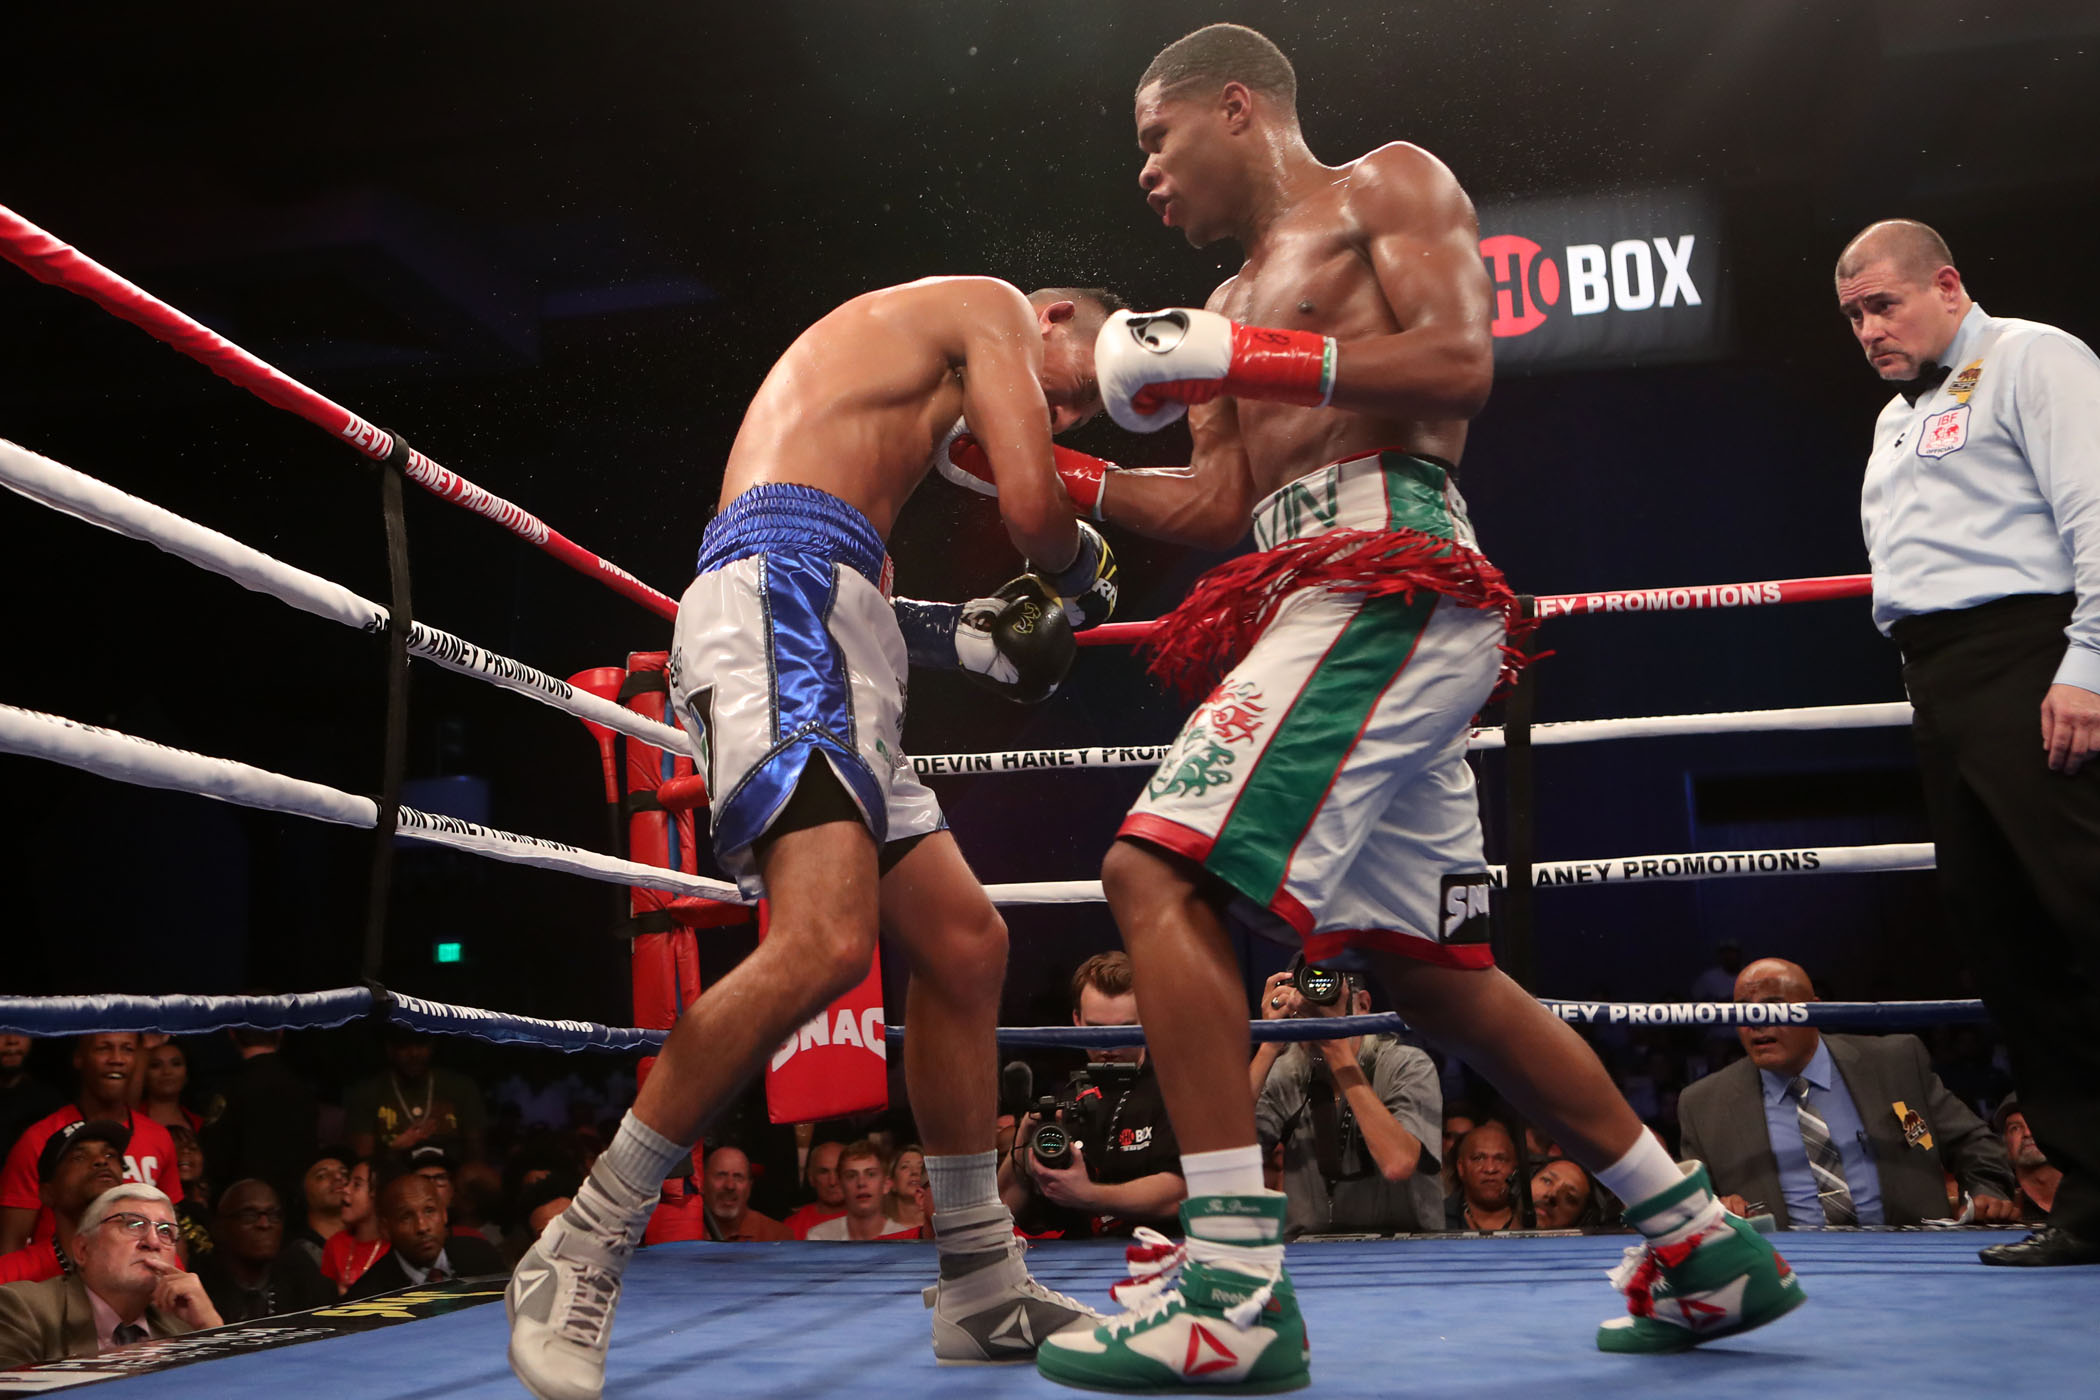 Devin Haney cruises to victory in step-up fight against Juan Carlos Burgos on ShoBox